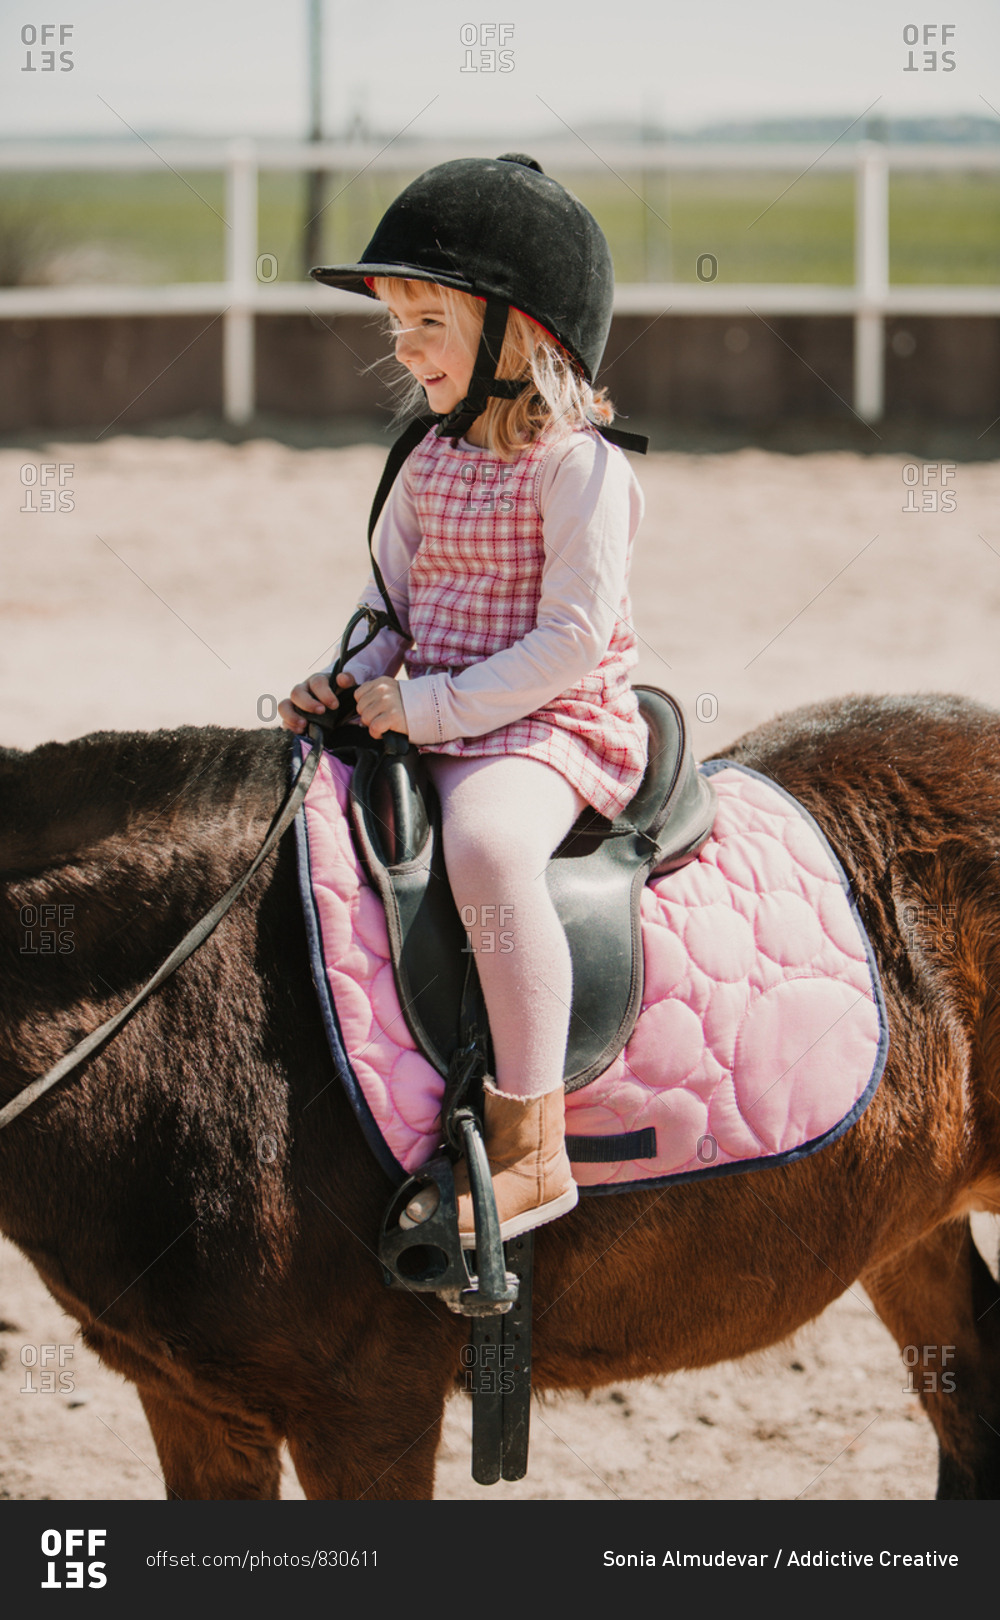 Cheerful small girl in dress and jockey hay sitting on horse while learning to ride on racetrack